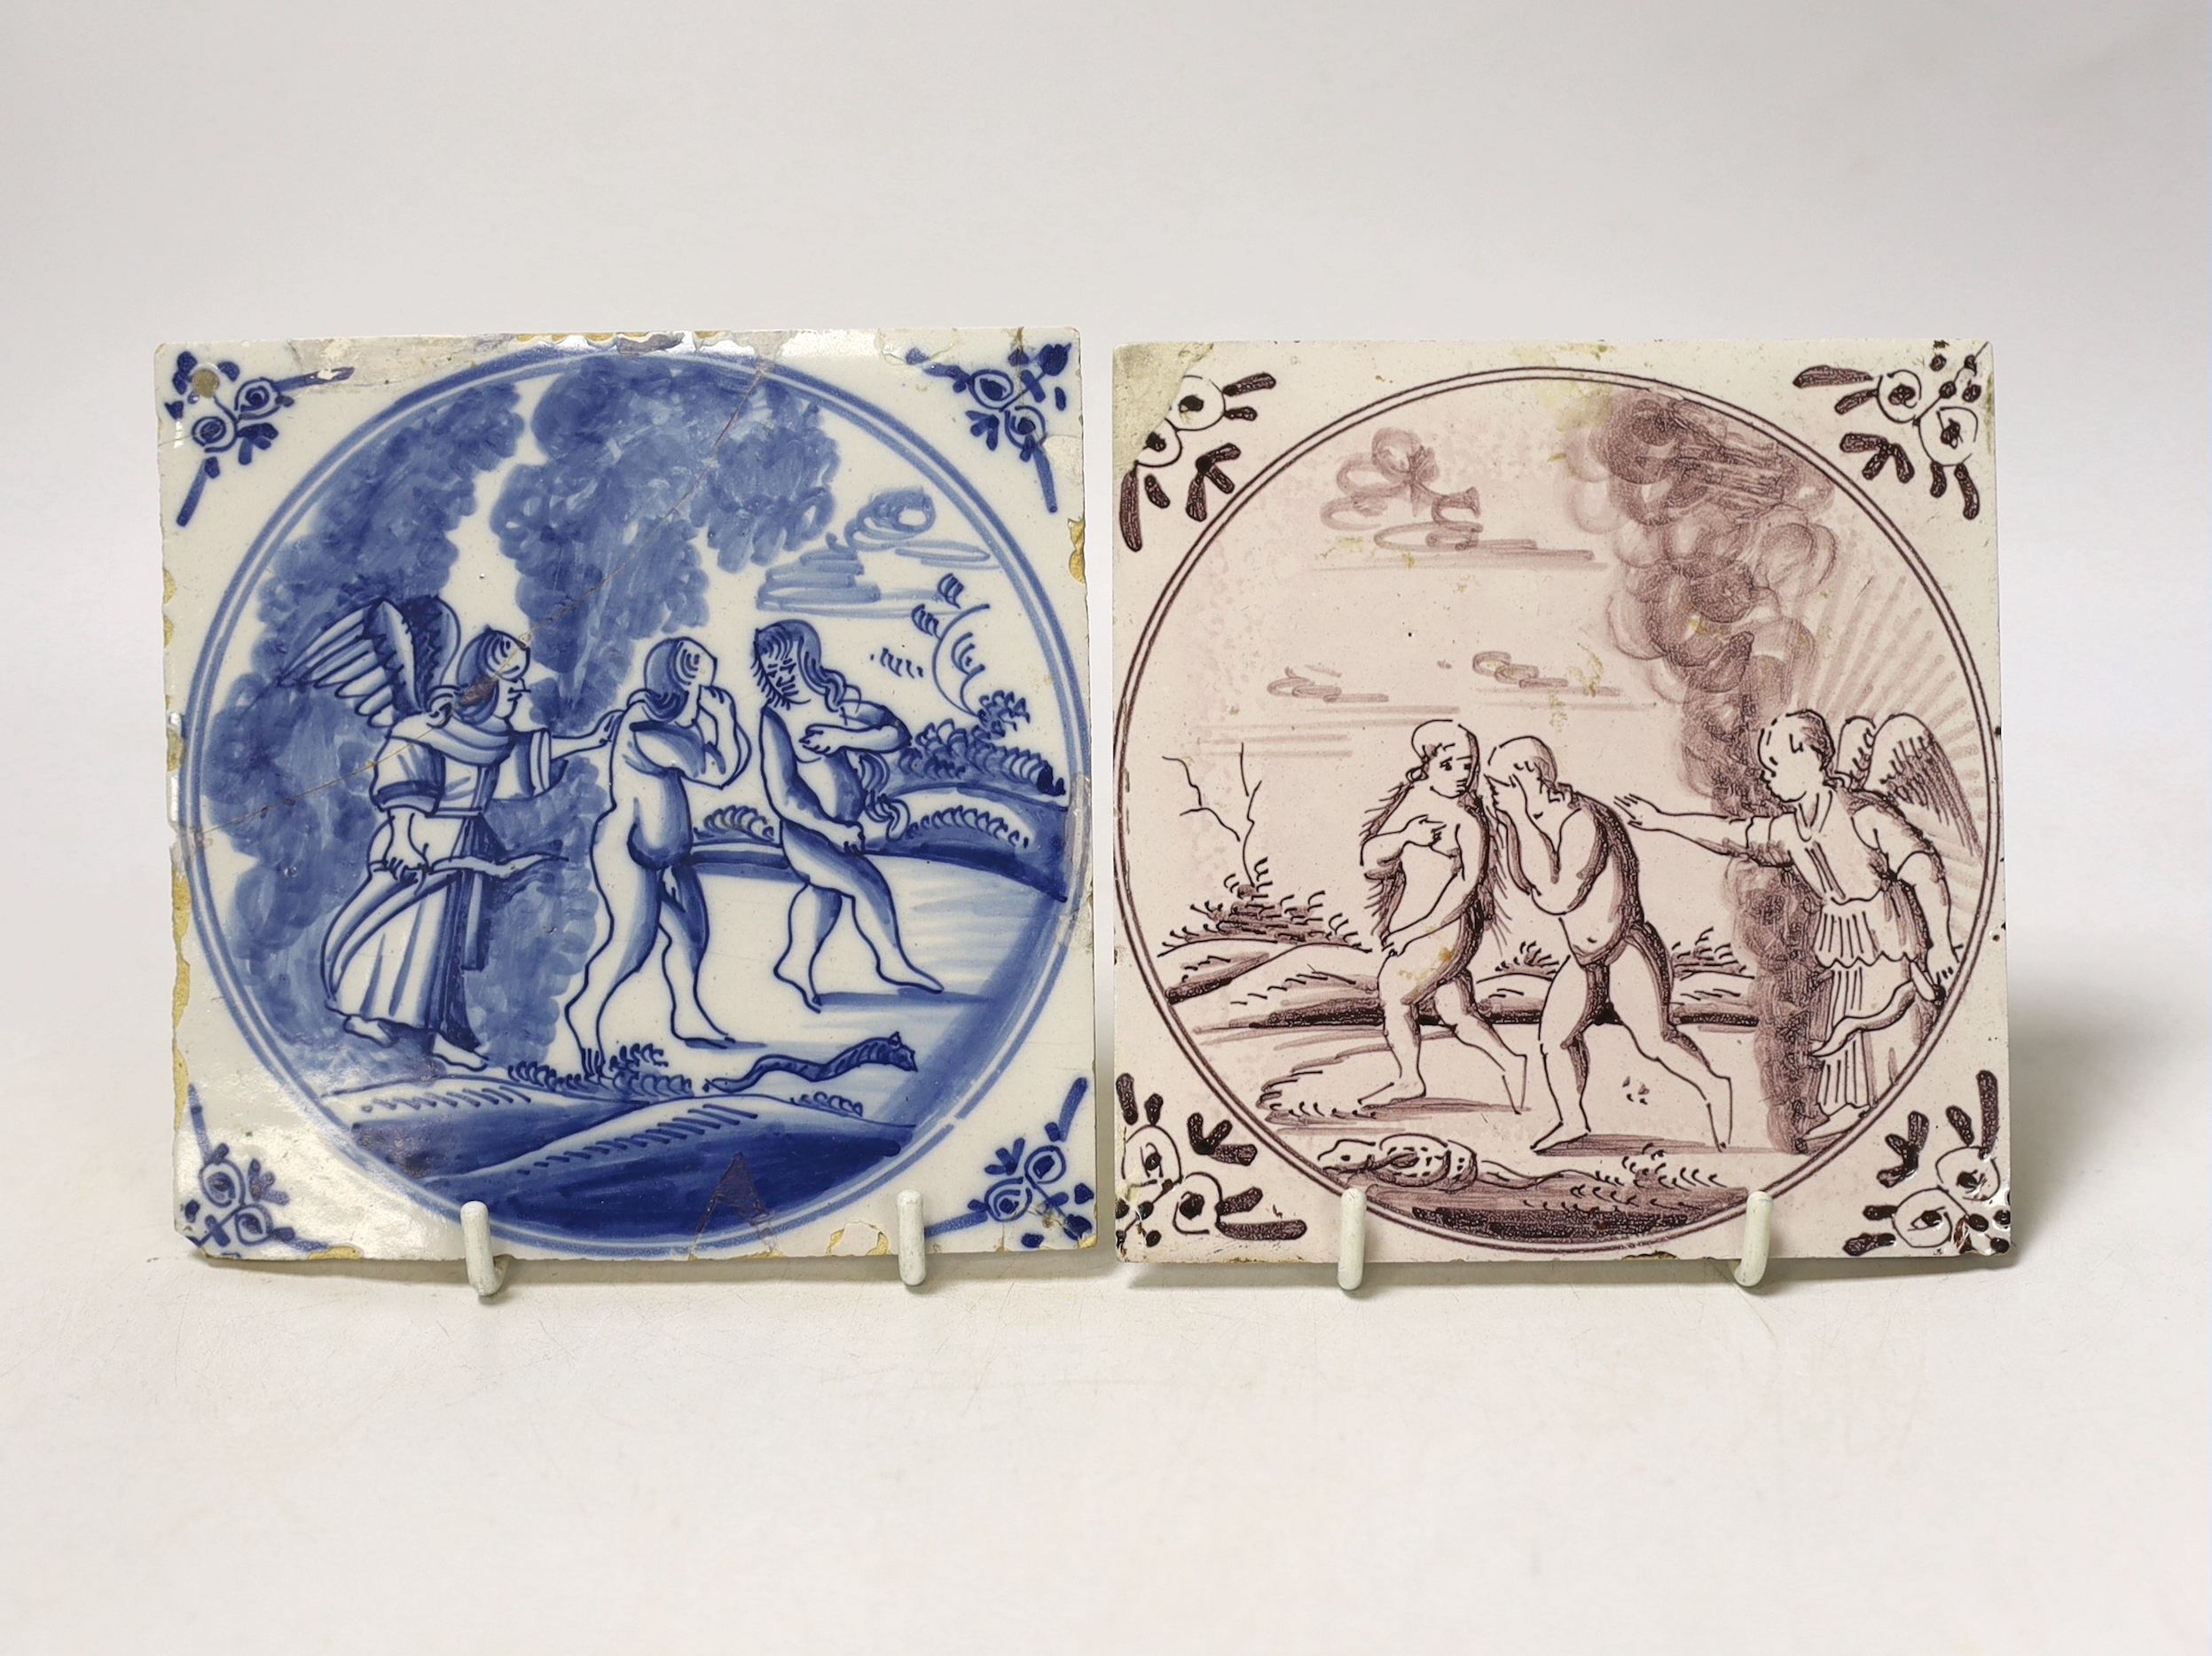 Two 18th/19th century Delft tiles, 13cmsq